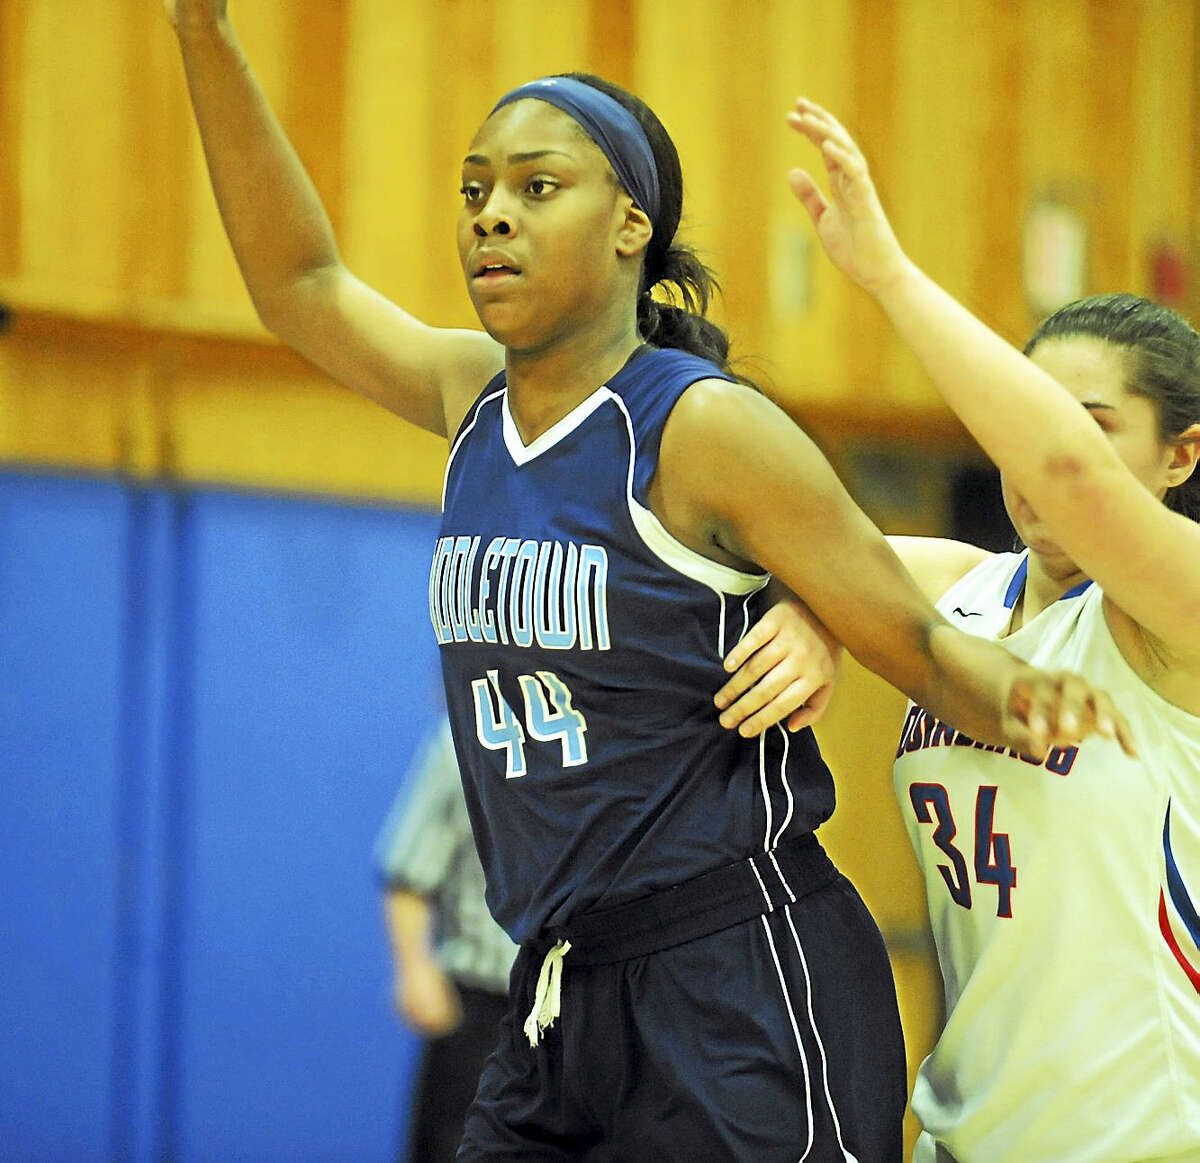 Middletown junior center Brielle Wilborn looks for the ball in the low post in the Blue Dragons’ recent non-league contest against Cogicnhaug in Durham.